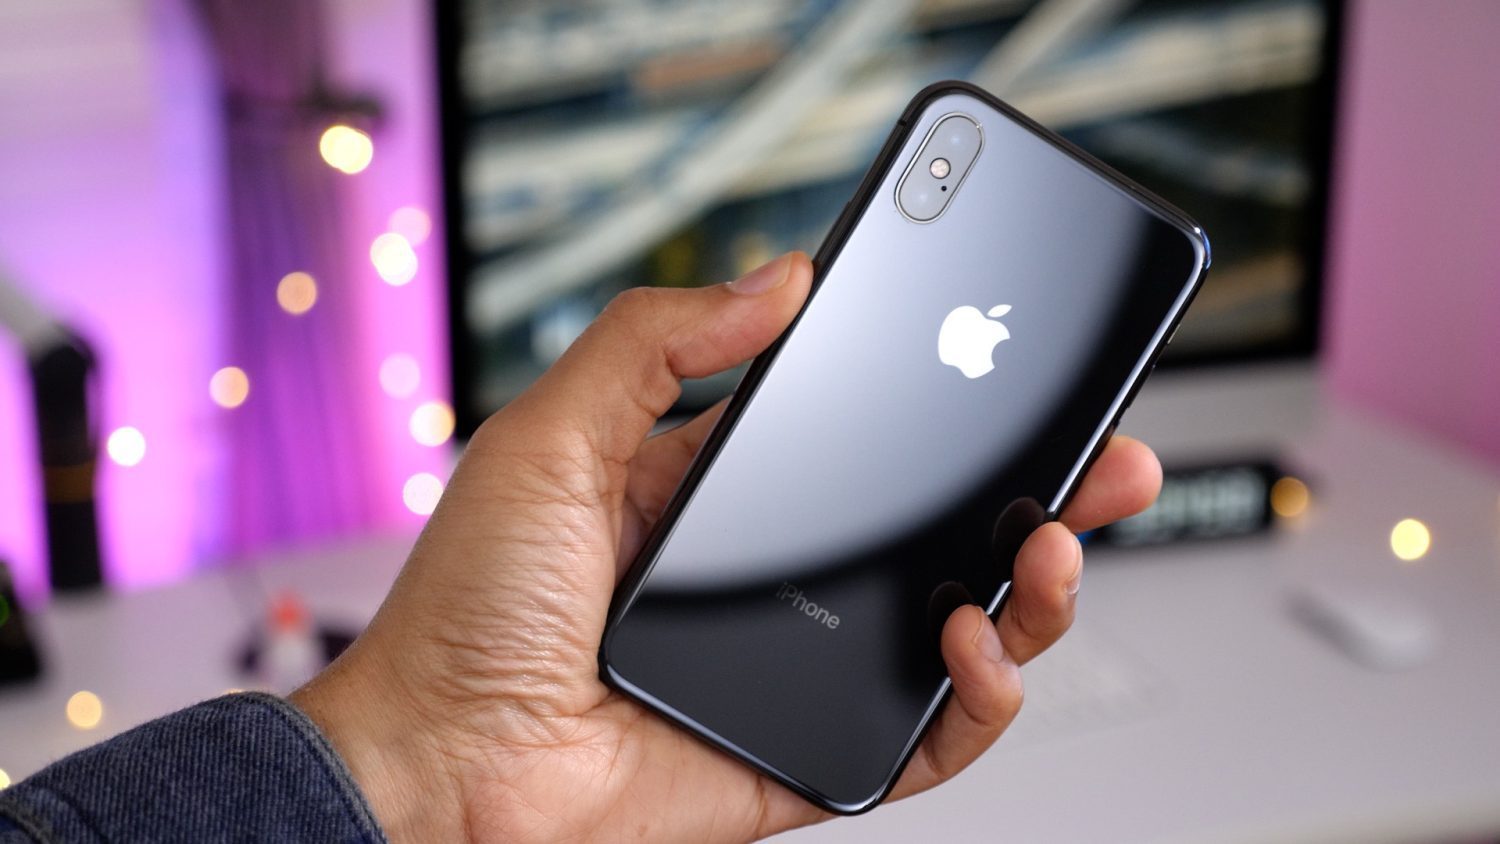 iPhone X vs iPhone 11 comparison: Should you upgrade? - 9to5Mac